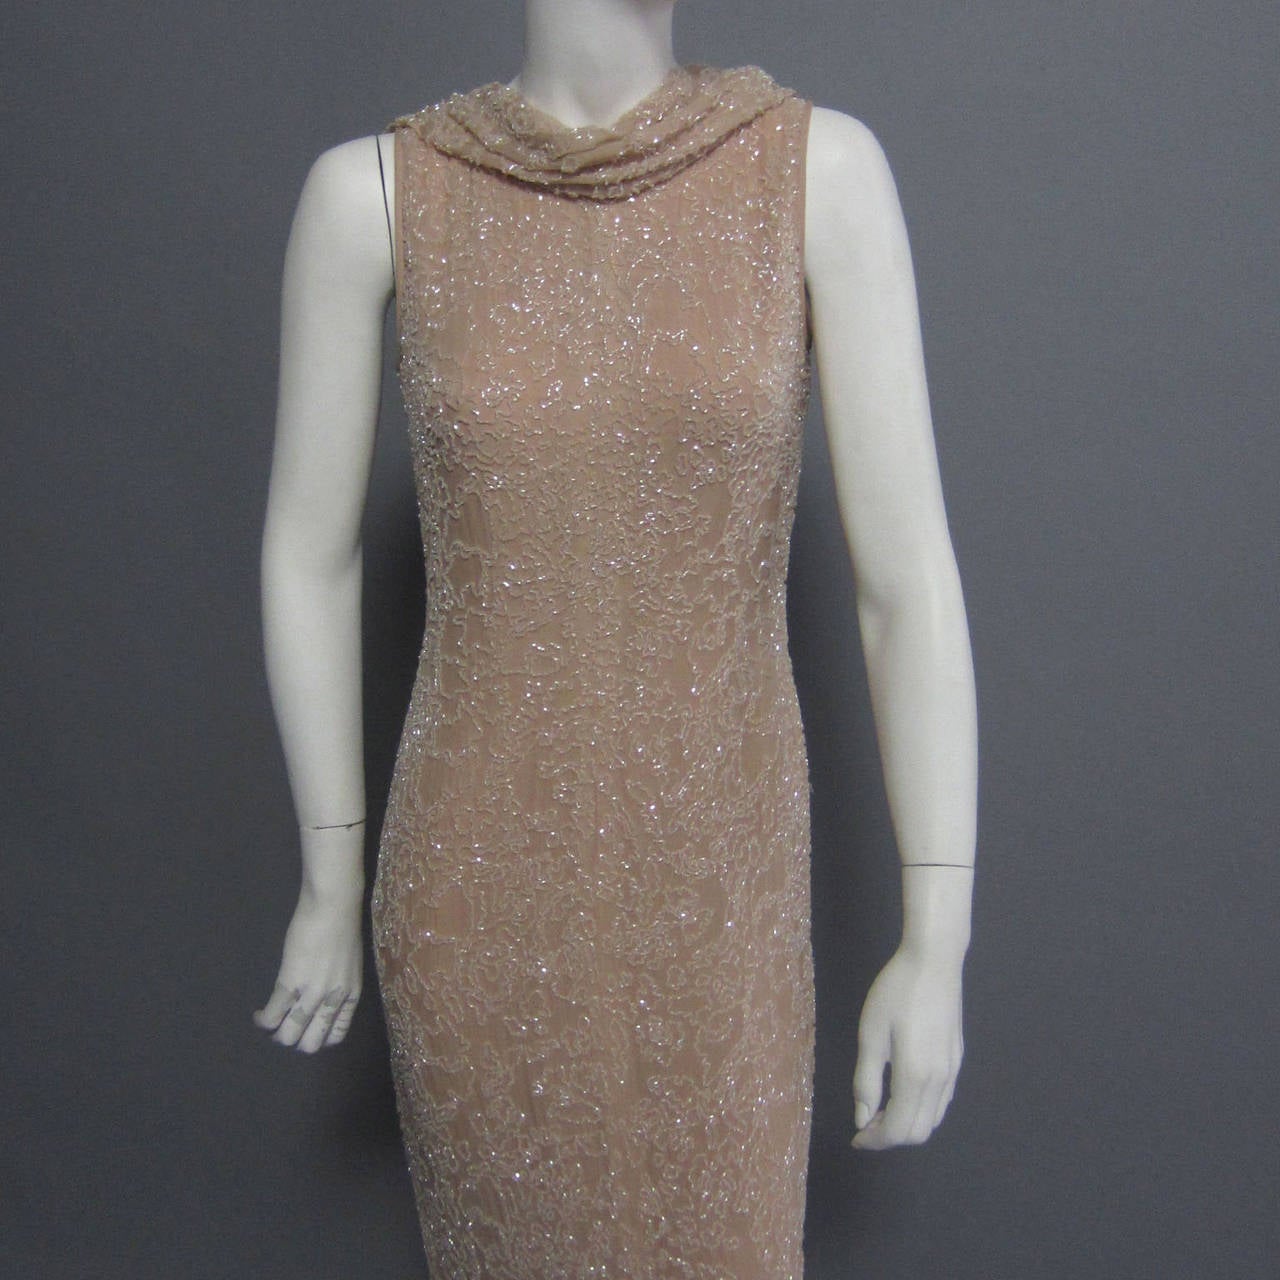 A gorgeous, beaded evening gown by the iconic American designer, HALSTON. The gown is a pastel shade of pink; the pale color is enhanced by the indicate beadwork. The shinny, bugle beadwork covers the entire gown. There is an extra panel of beaded